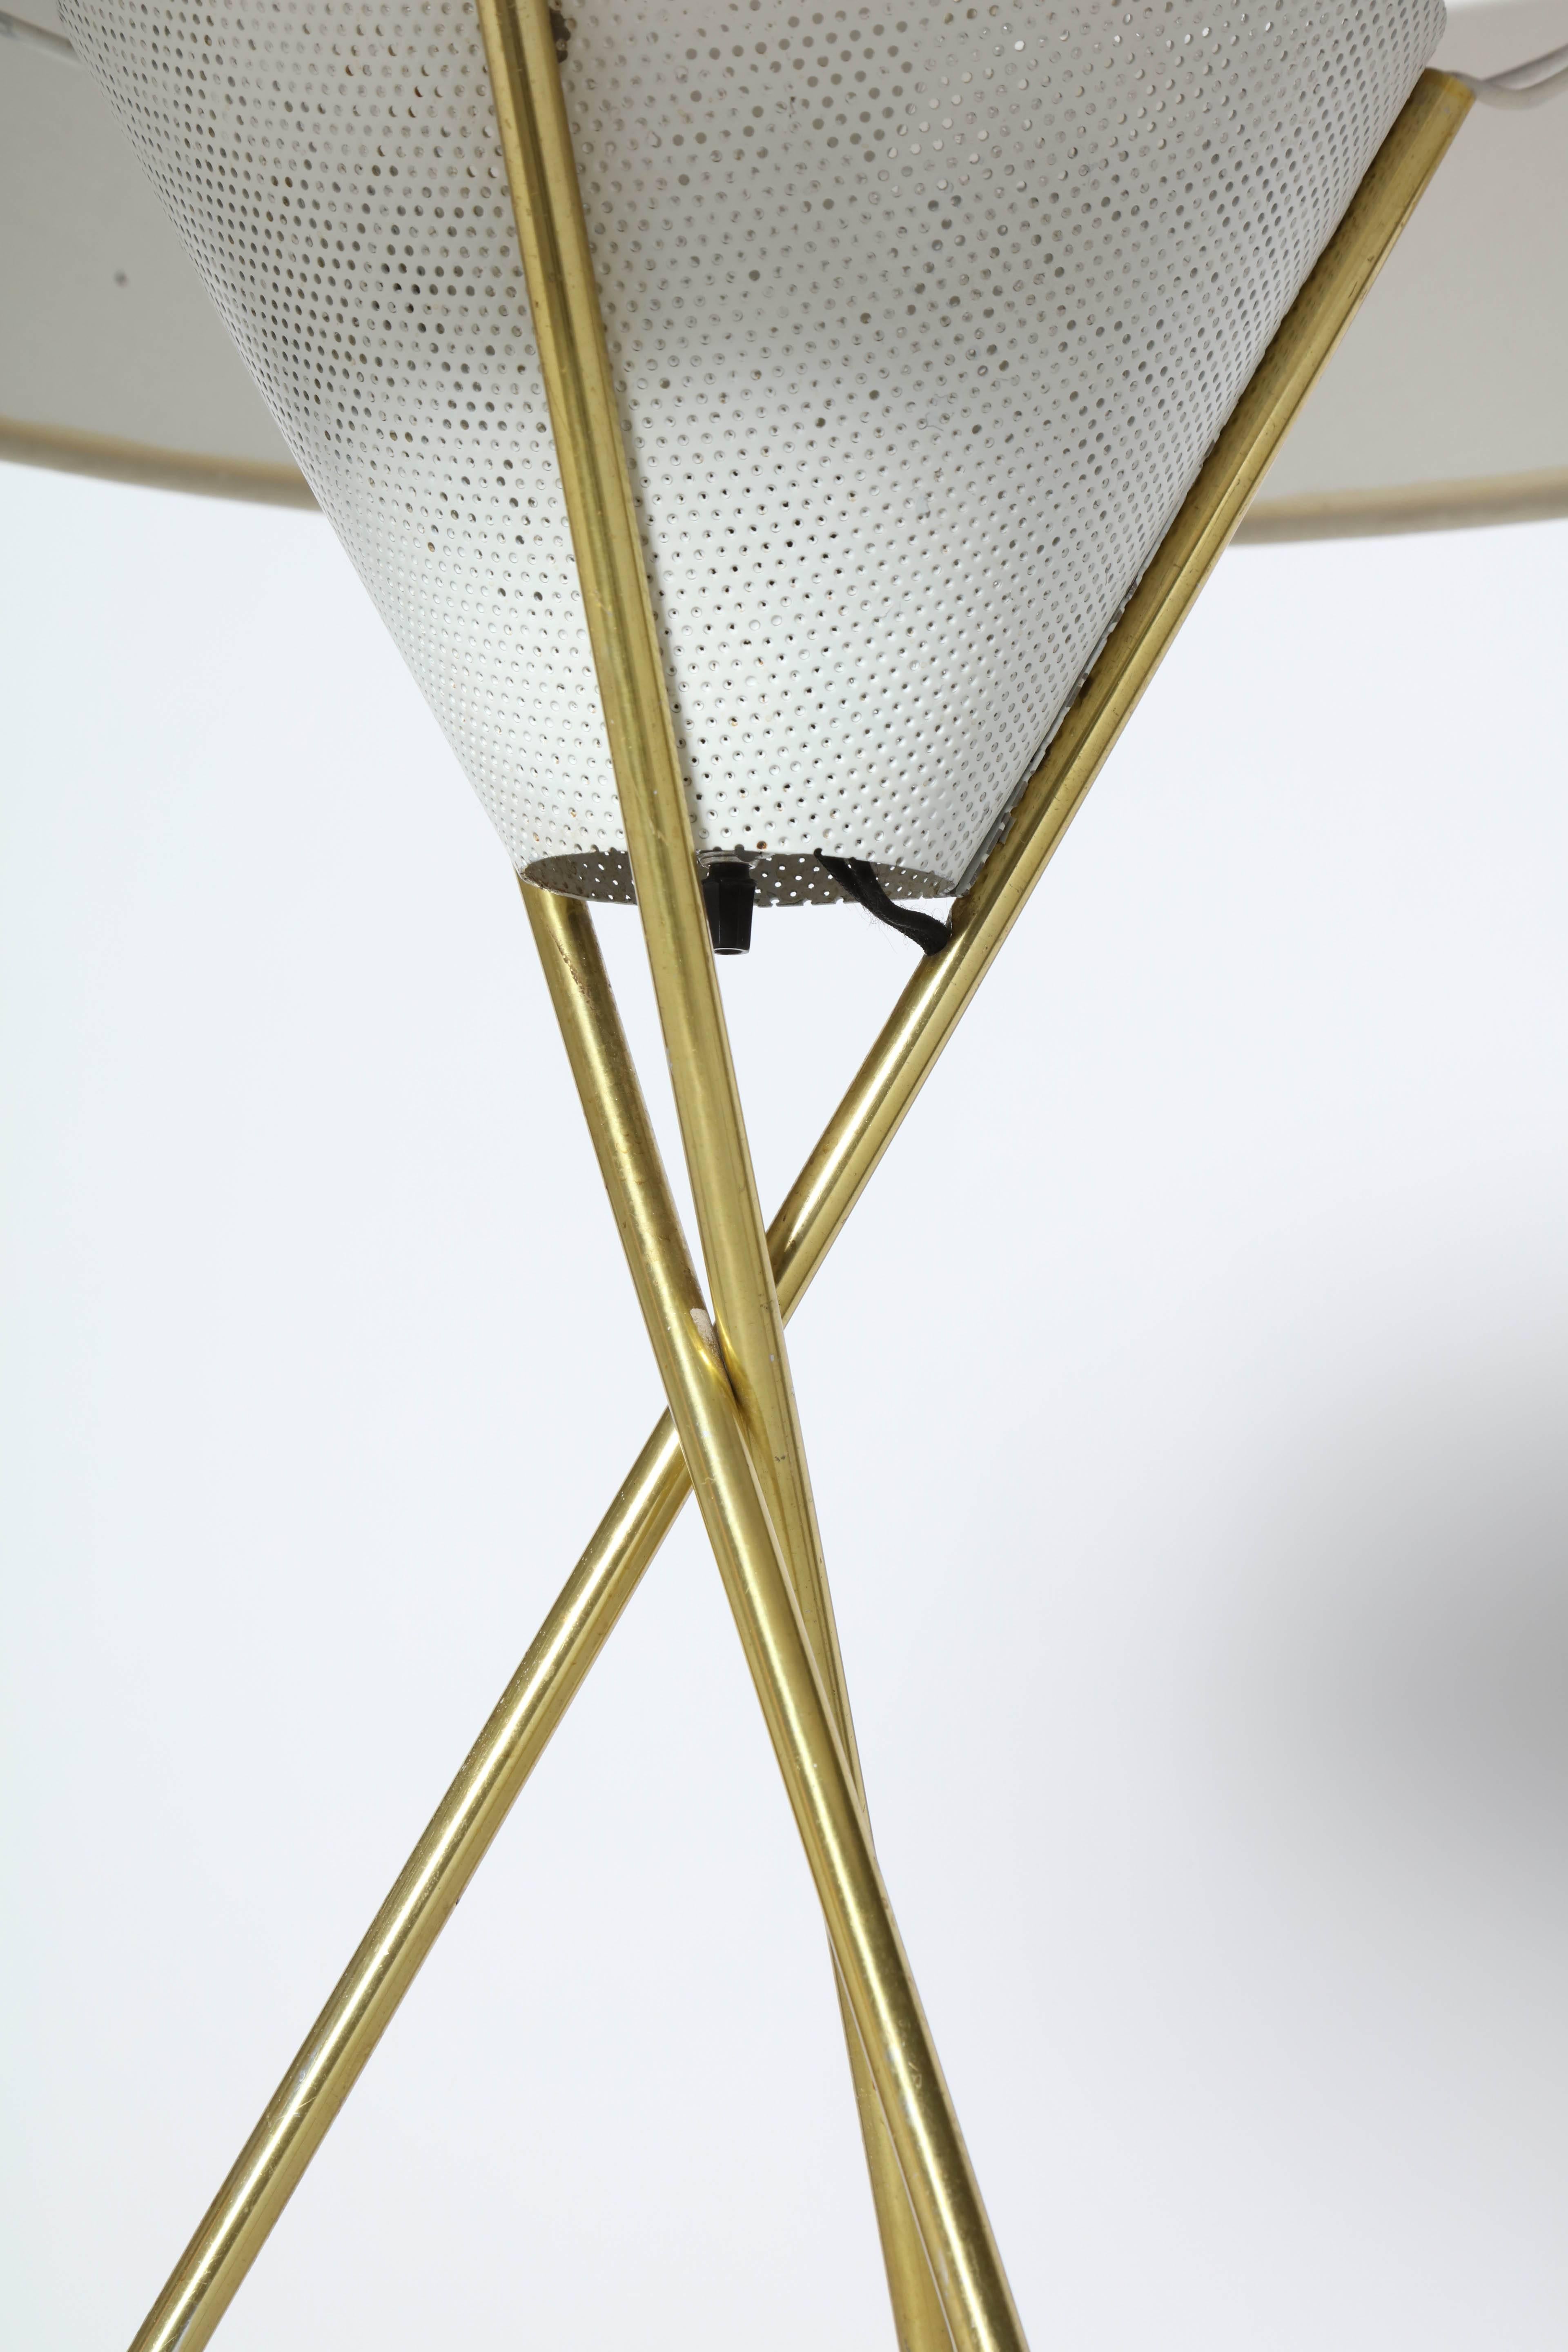 Metal Gerald Thurston for Lightolier Brass Tripod Table Lamp with White Linen Shade